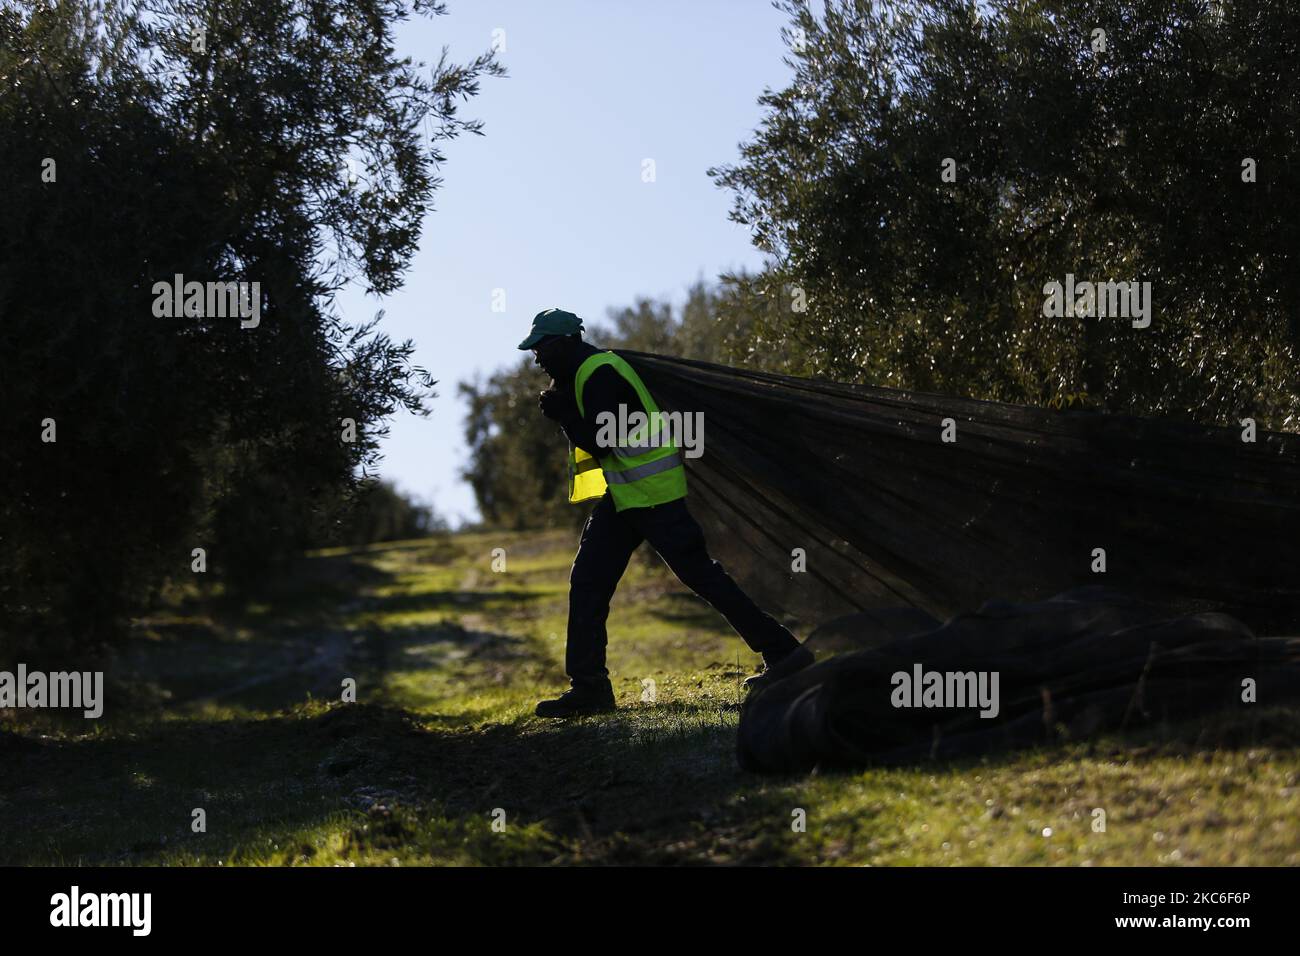 A temporary worker from Africa moves a big net with olives during the olive harvest amid the coronavirus pandemic on December 26, 2020 in the Sierra de Cazorla Region in Jaen, Spain. Jaen is a province from Andalusia, Spain, that produces more than 20% of the olive oil worldwide and 50% just in Spain. (Photo by Álex Cámara/NurPhoto) Stock Photo